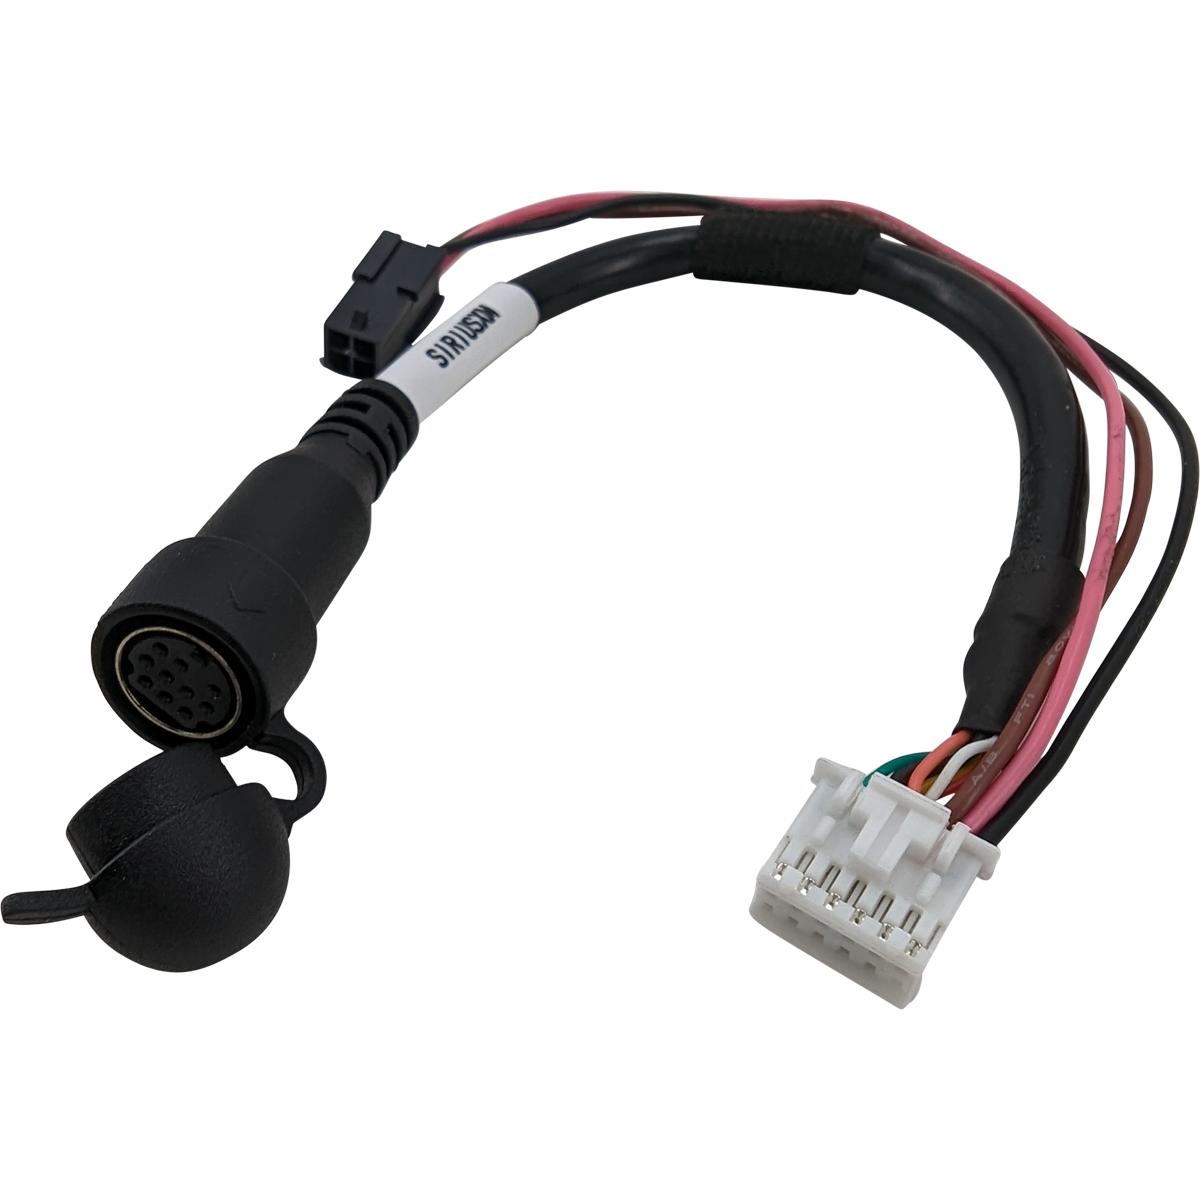 ENLIGHT10 Harness Connector for the HEIGH10 Radio